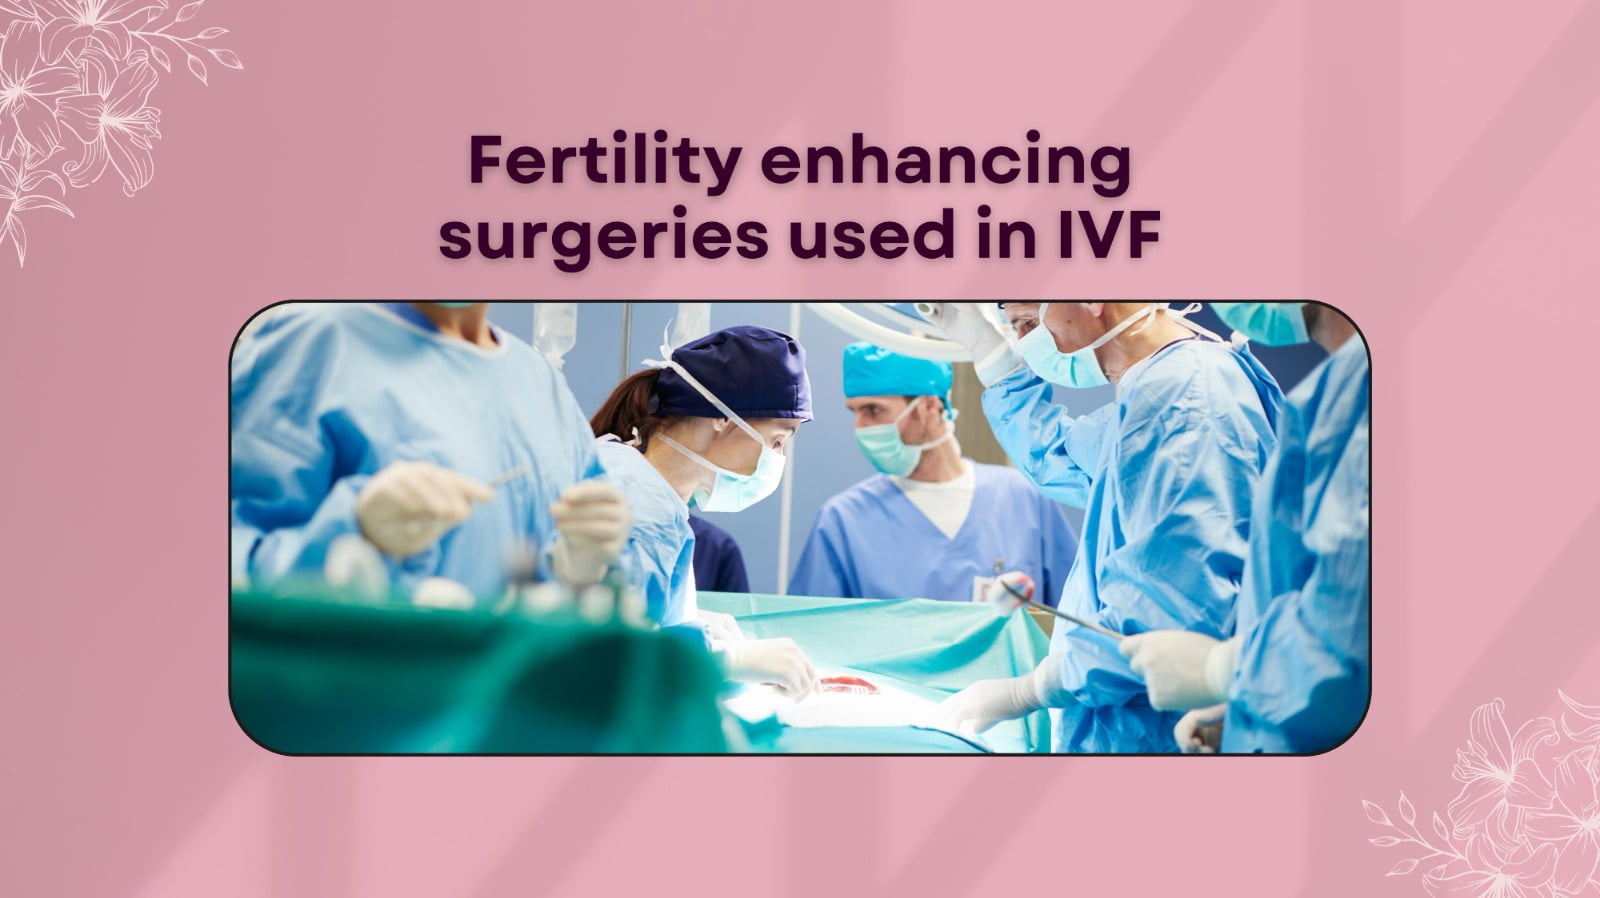 Fertility-enhancing surgeries used in IVF